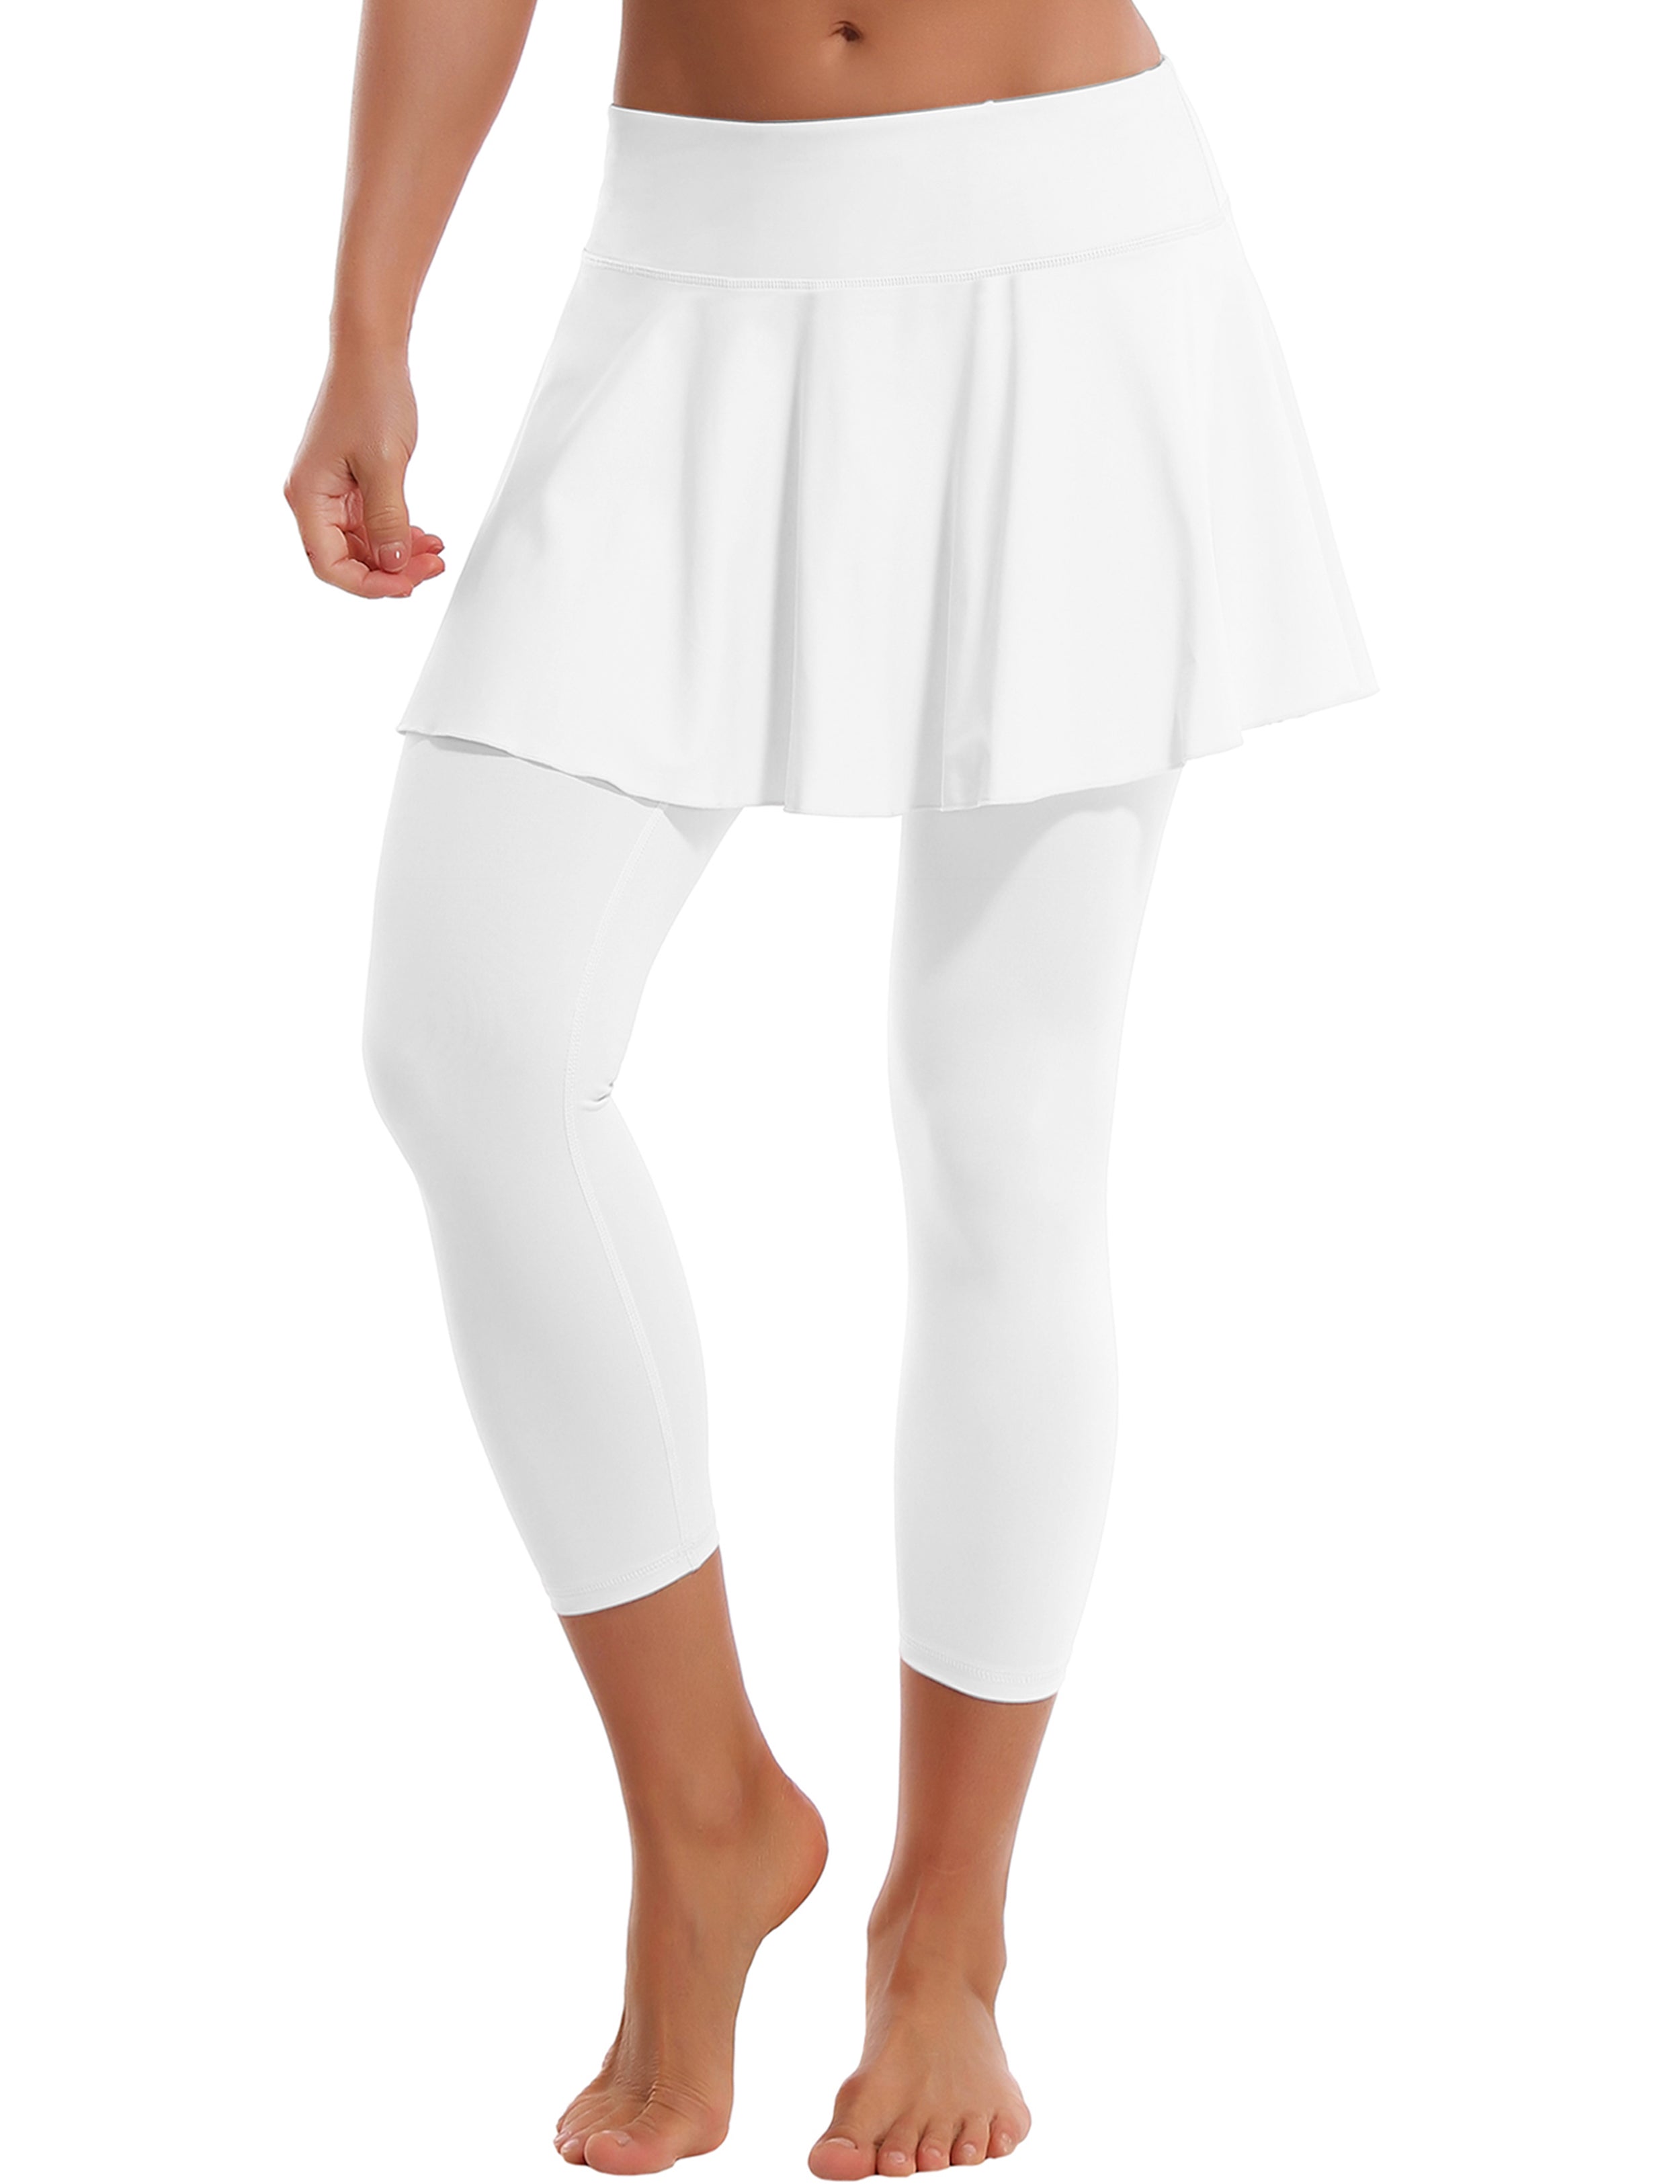 19" Capris Tennis Golf Skirted Leggings with Pockets white 80%Nylon/20%Spandex UPF 50+ sun protection Elastic closure Lightweight, Wrinkle Moisture wicking Quick drying Secure & comfortable two layer Hidden pocket